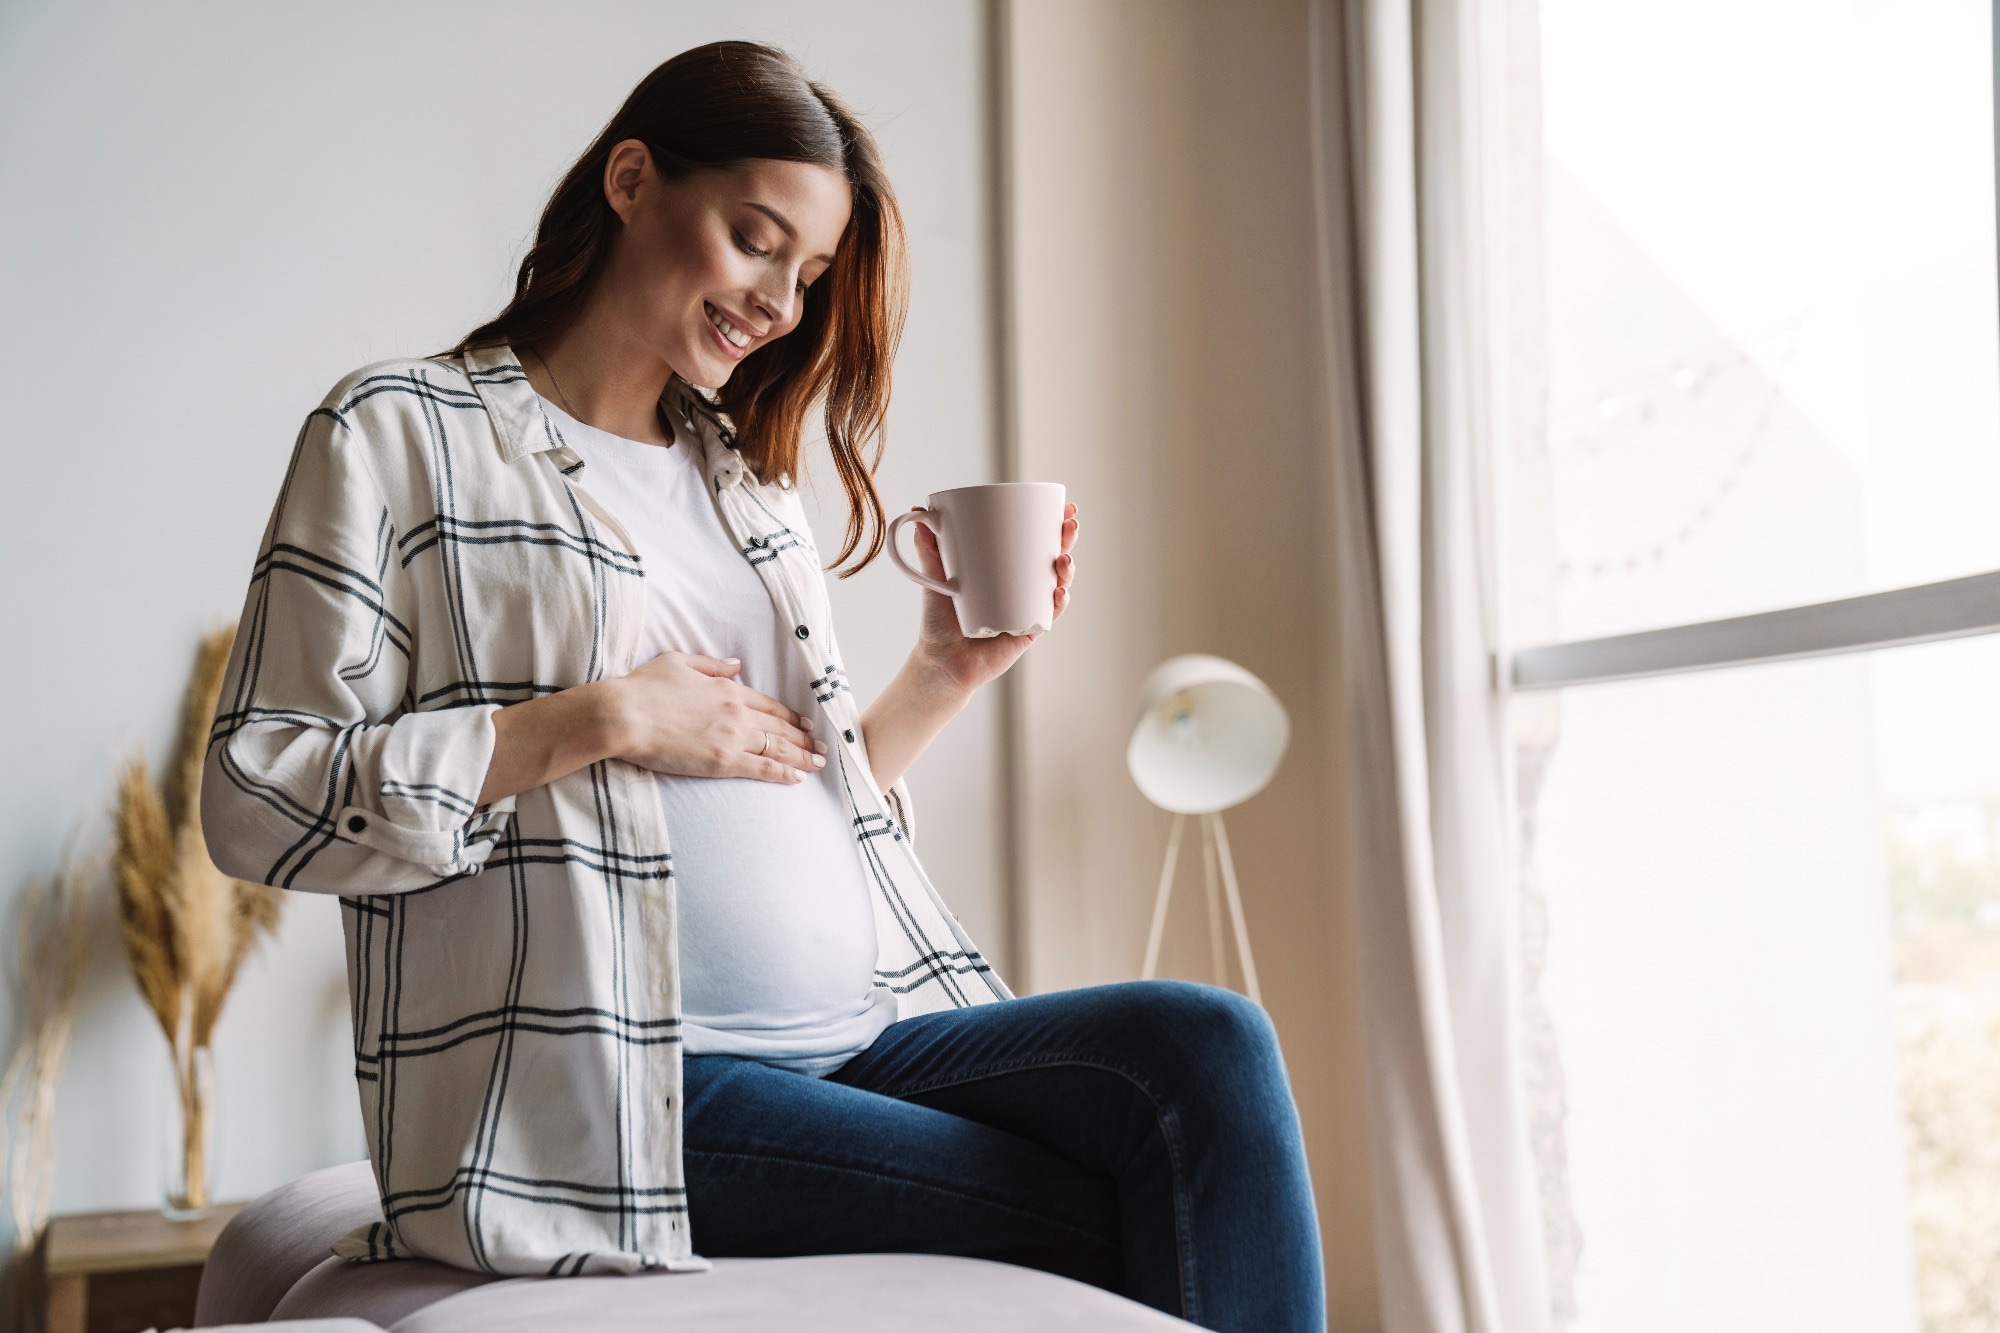 Study: Maternal positive mental health during pregnancy impacts the hippocampus and functional brain networks in children. Image Credit: Dean Drobot / Shutterstock.com